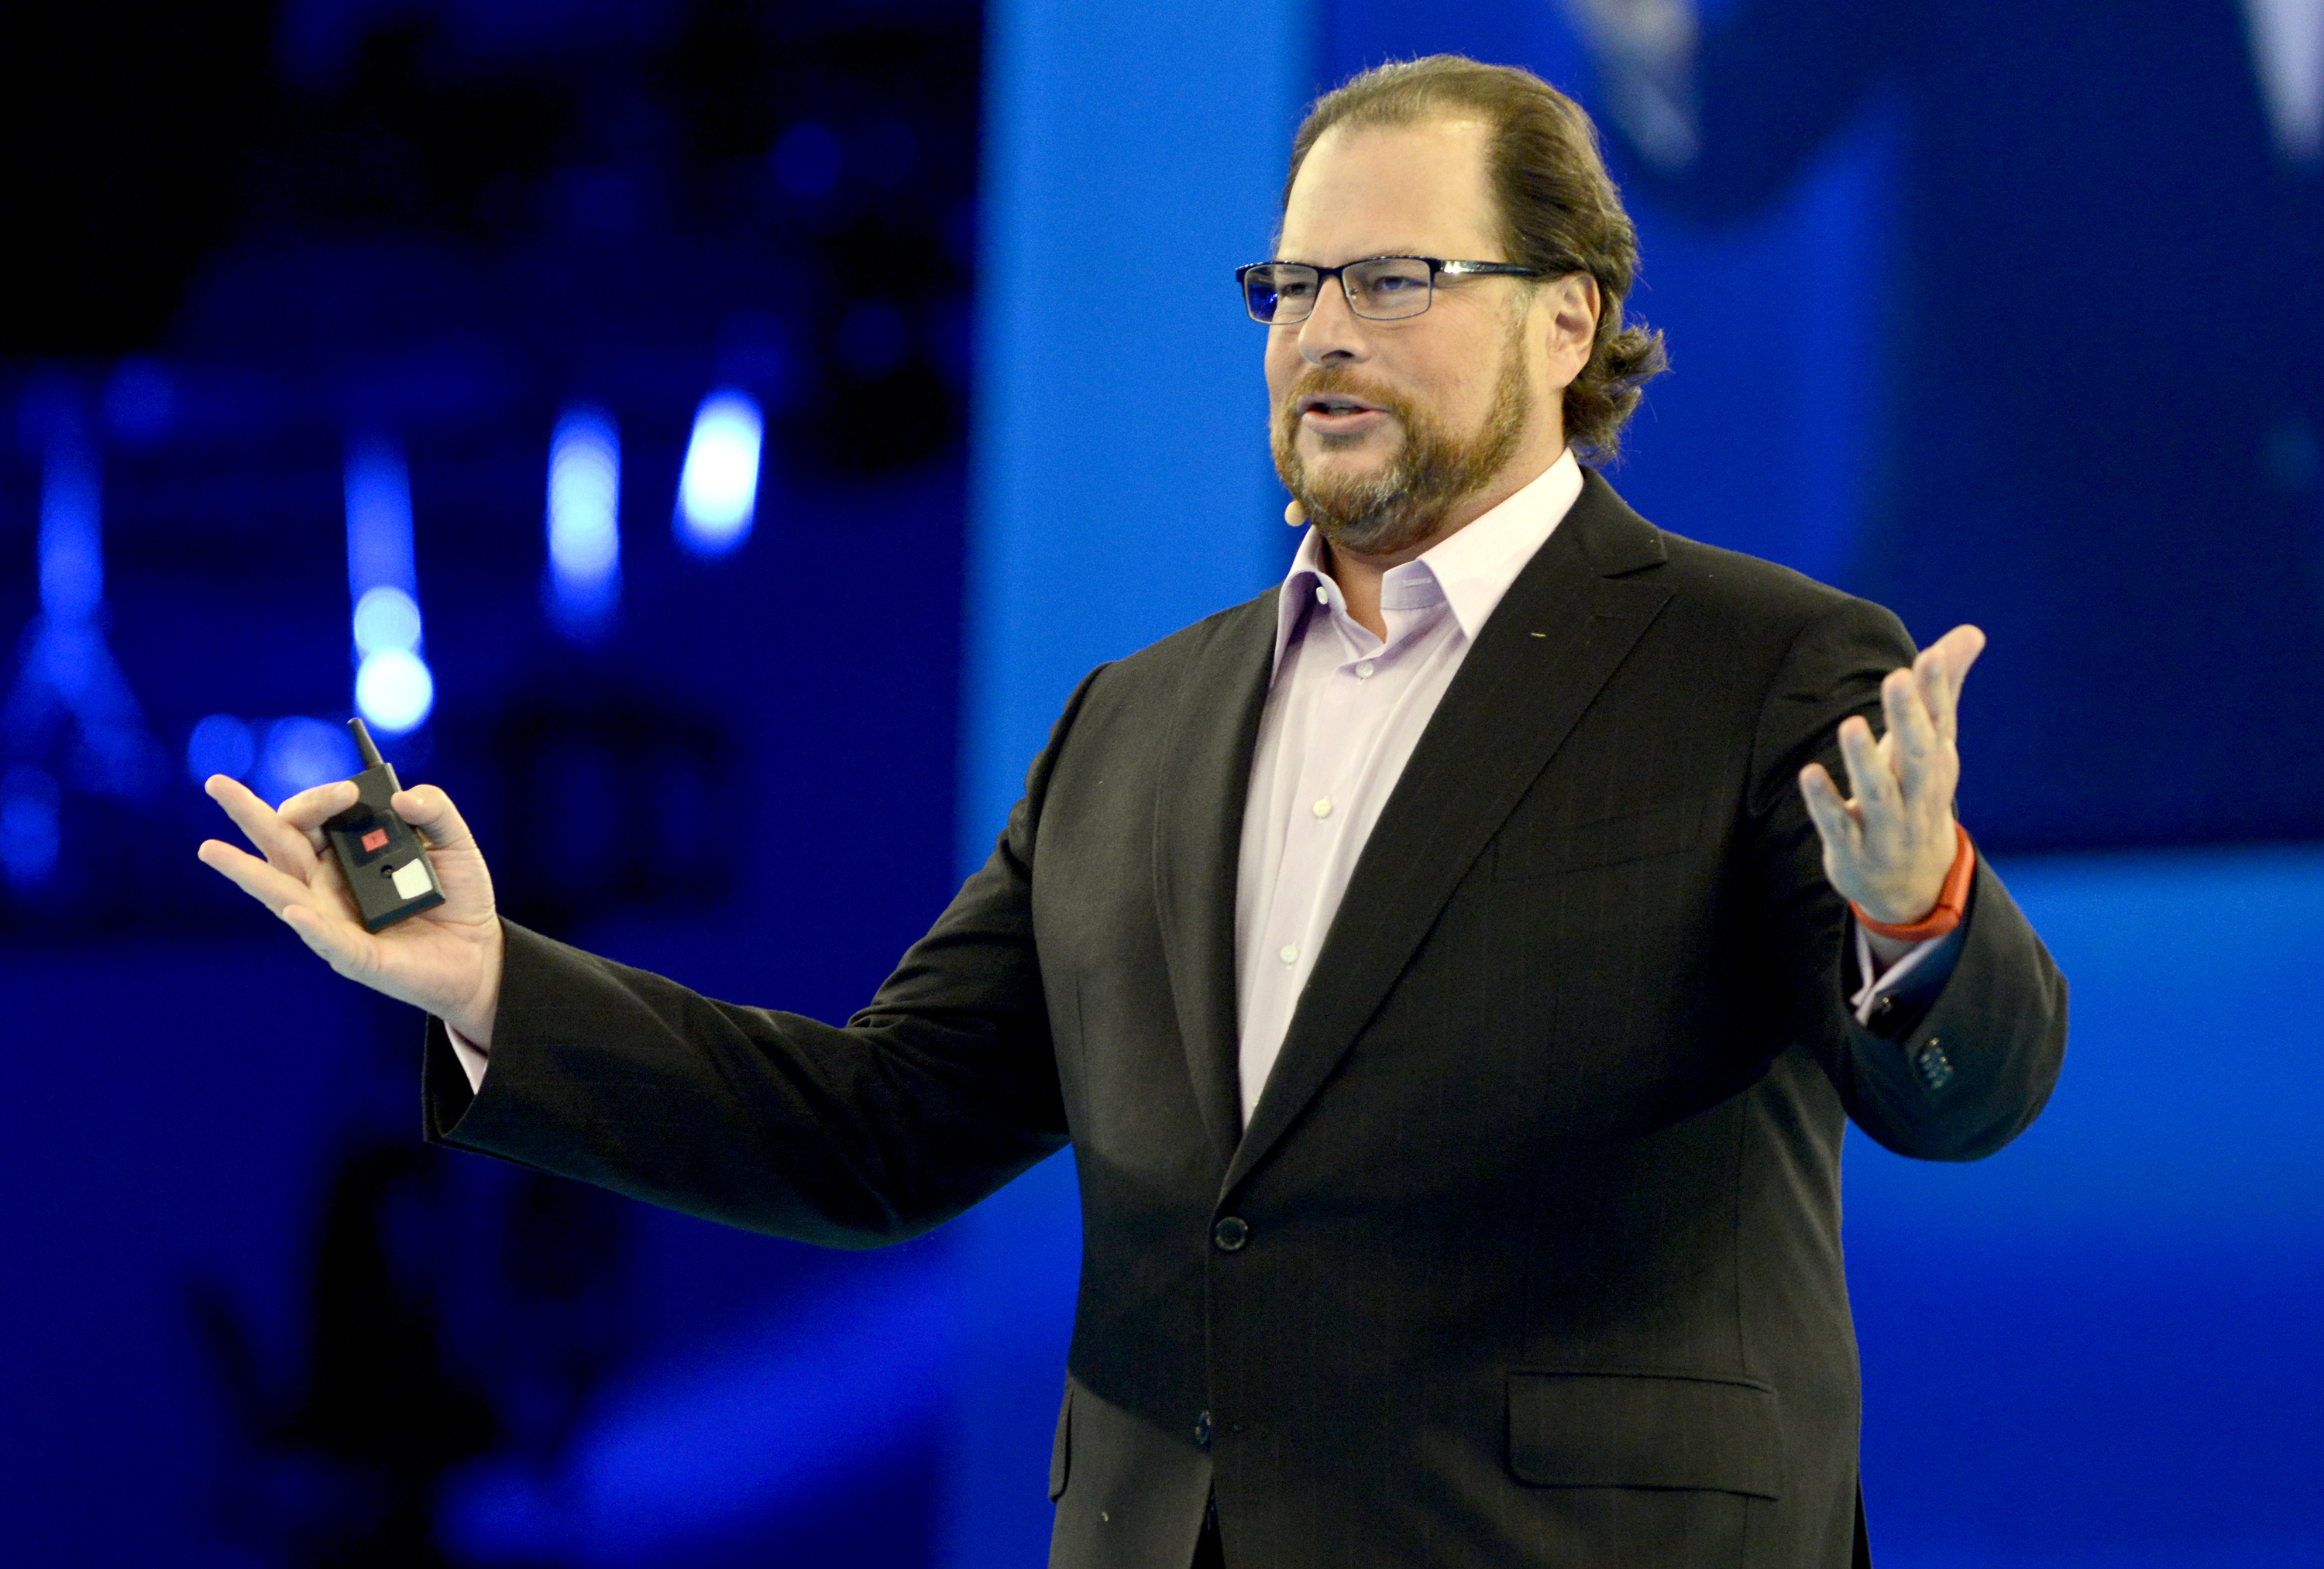 Marc Benioff delivers the keynote speech at Salesforce.com's Dreamforce 2014 Conference at Moscone South on October 14, 2014 in San Francisco, California. (Tim Mosenfelder—Getty Images)